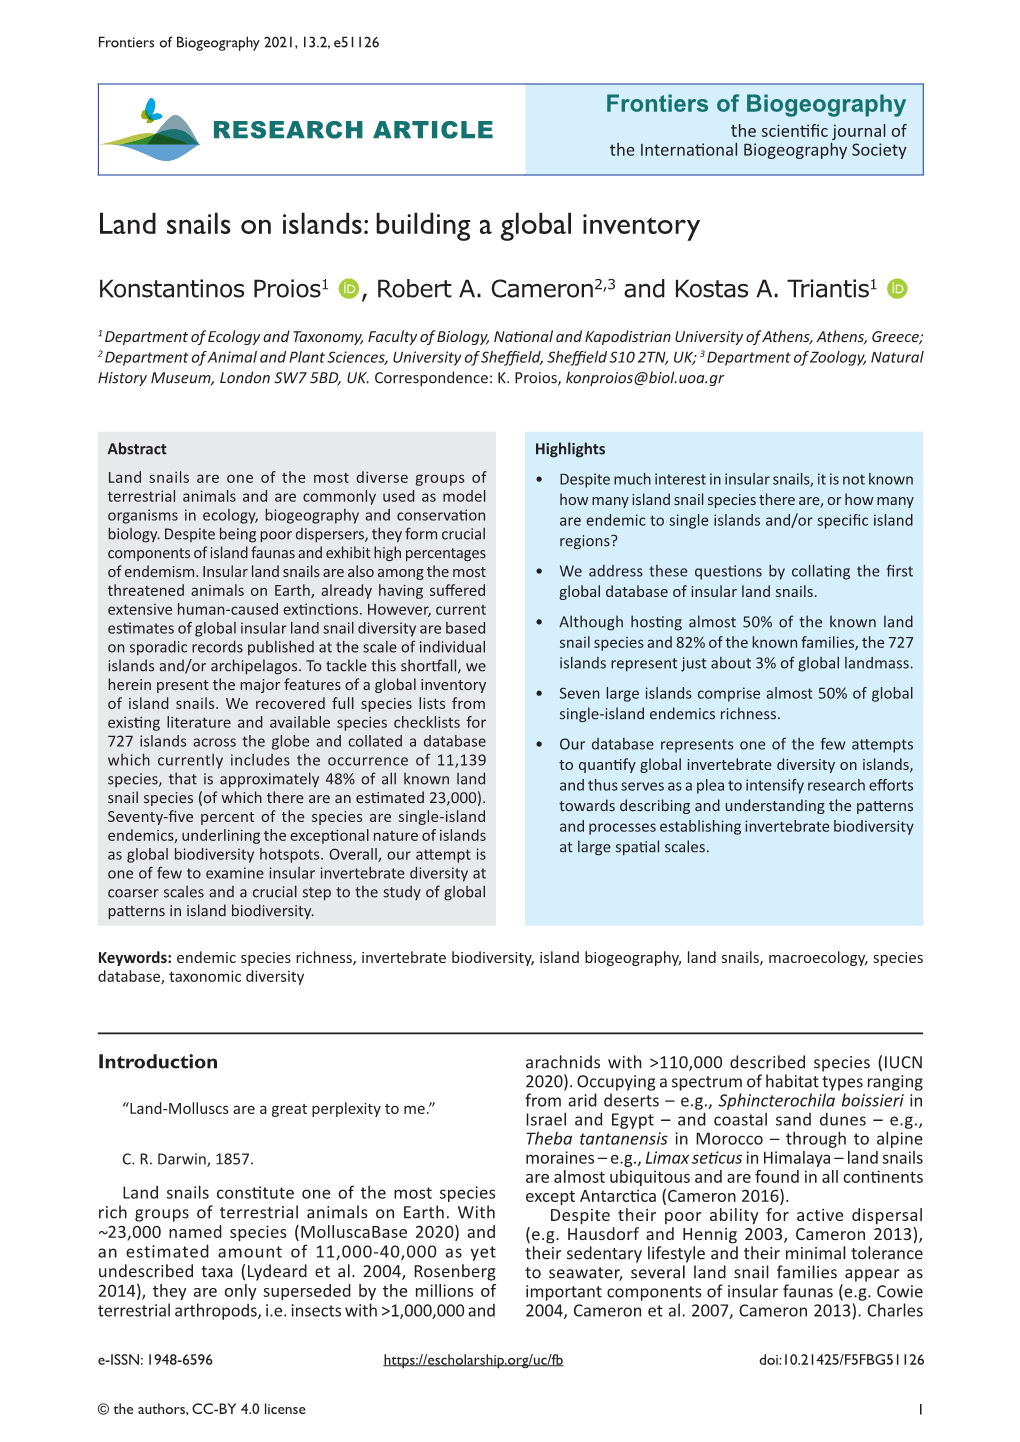 Land Snails on Islands: Building a Global Inventory